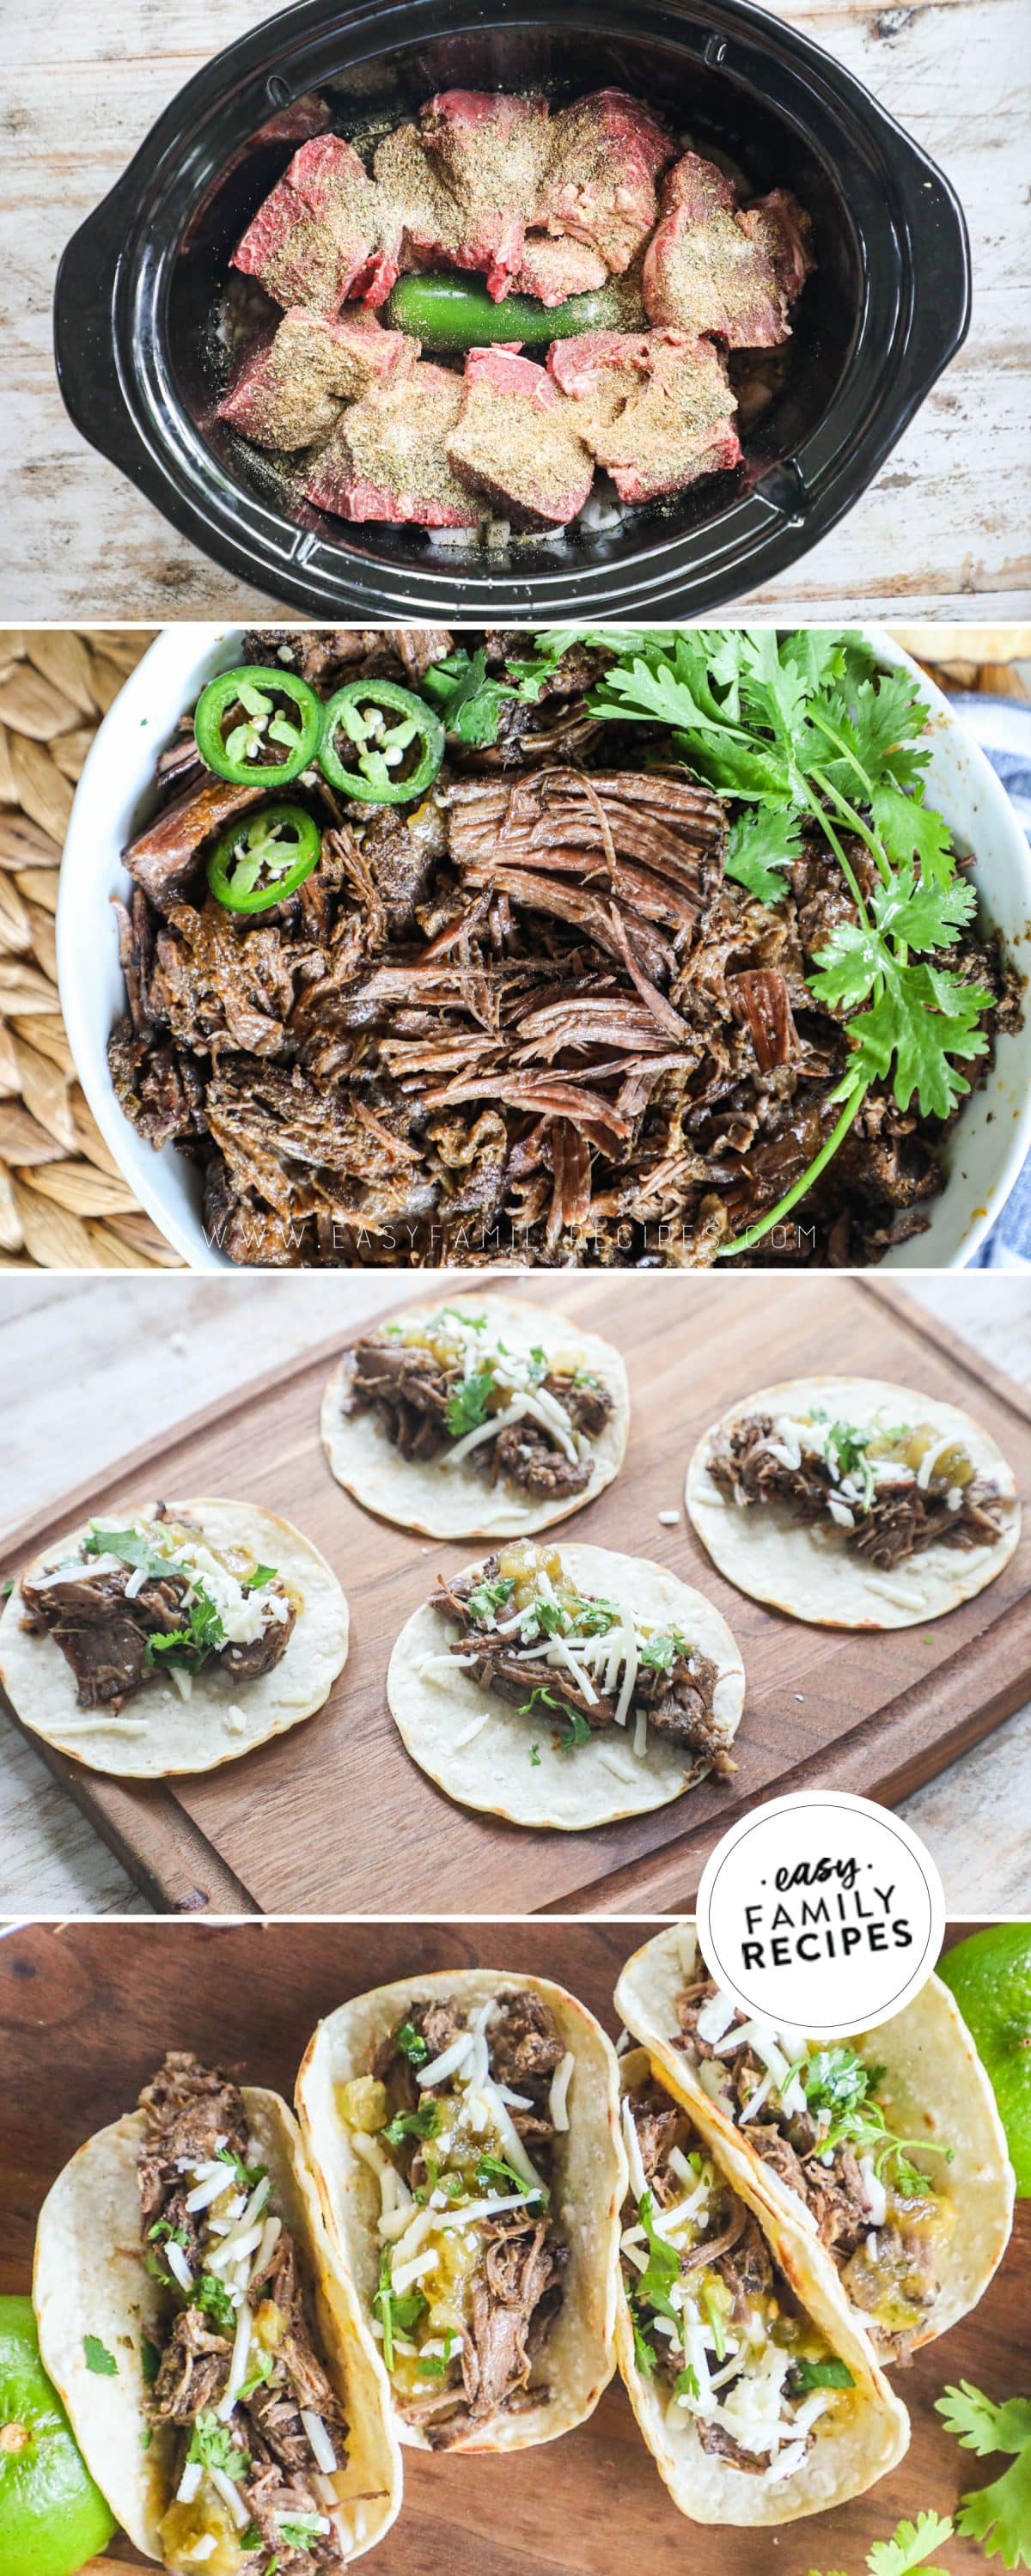 Steps to make slow cooker beef tacos step 1 make the barbacoa beef step 2 heat up the leftover beef step 3 top the heated tortillas step 4 enjoy with toppings.